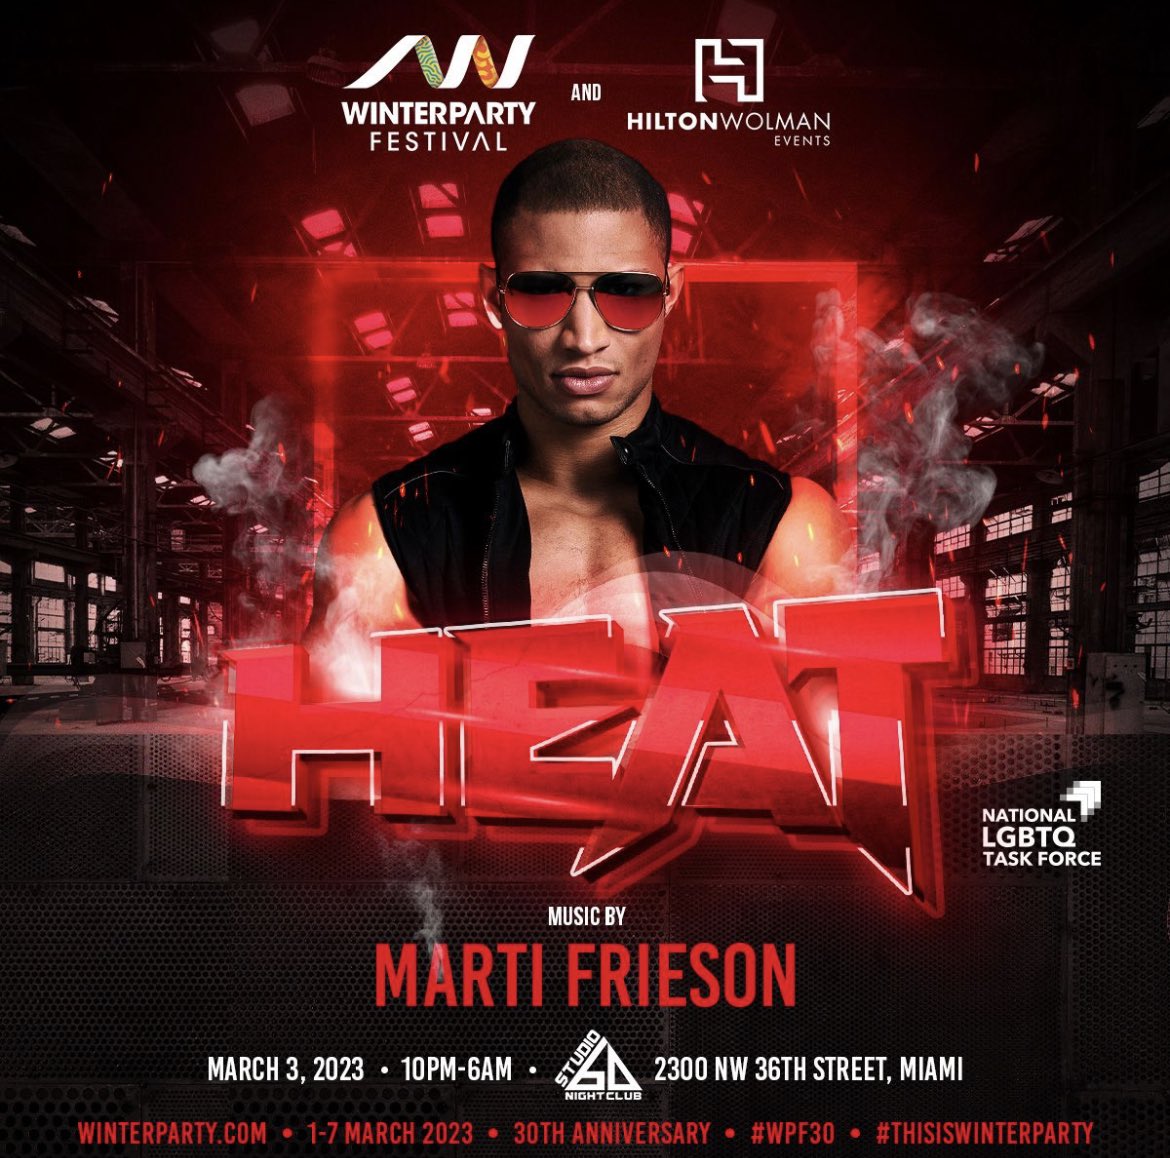 #FlashbackFriday to last time we fired up the weekend with HEAT! This year, we’re taking of Studio 60 Nightclub, alongside @hiltonwolman. Dance the night away to the beats of DJs Marti Frieson & Orel Sabag.

Tickets at winterparty.com/tickets-passes. #ThisIsWinterParty #WPF30